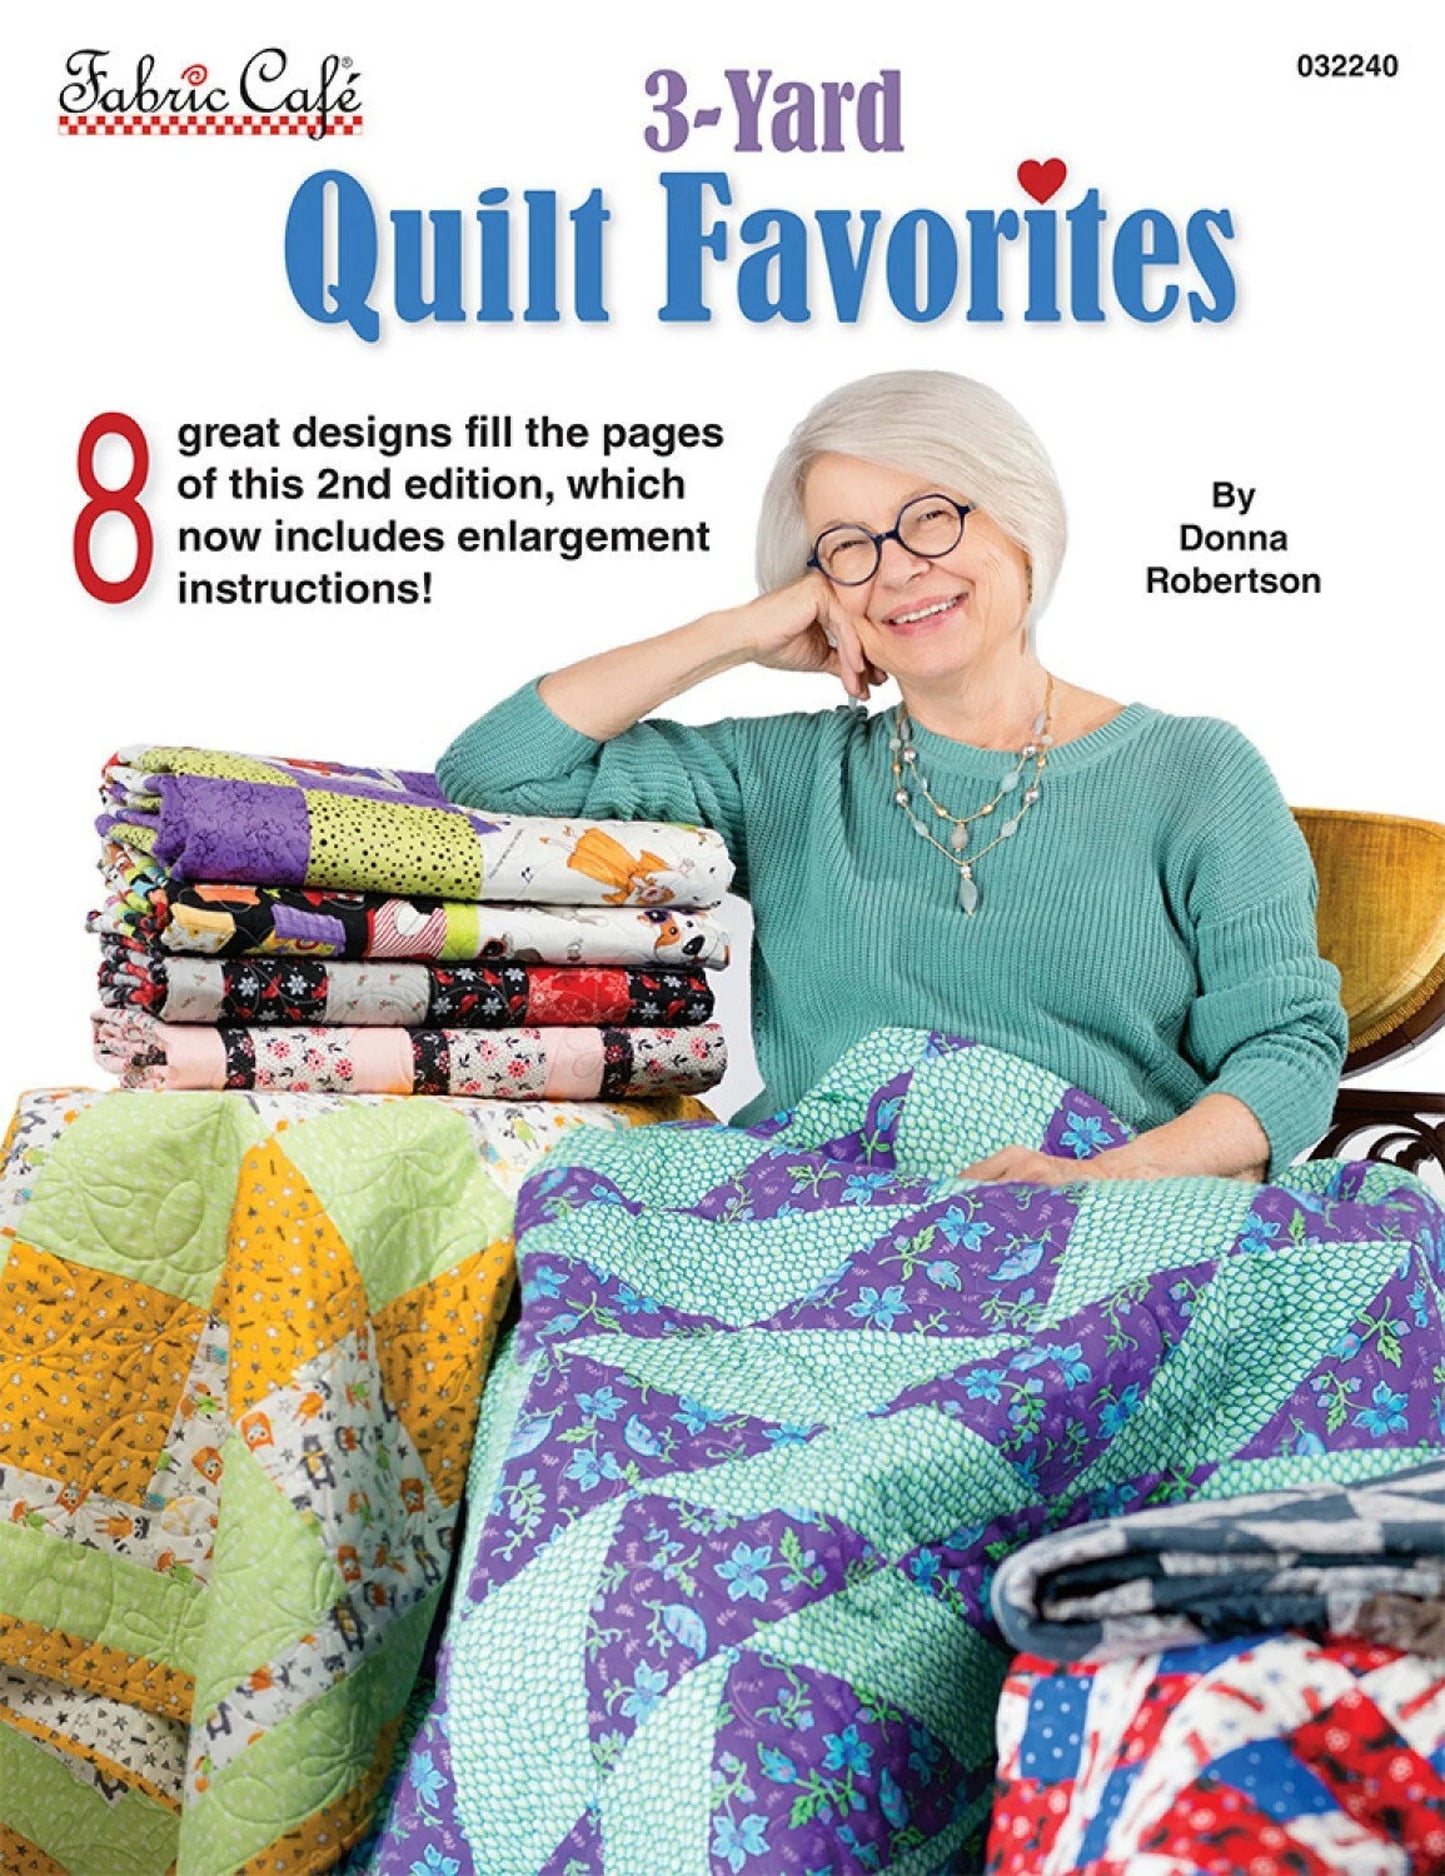 3 YARD QUILT FAVORITES 8 quilt designs DONNA ROBERTSON For FABRIC CAFE!